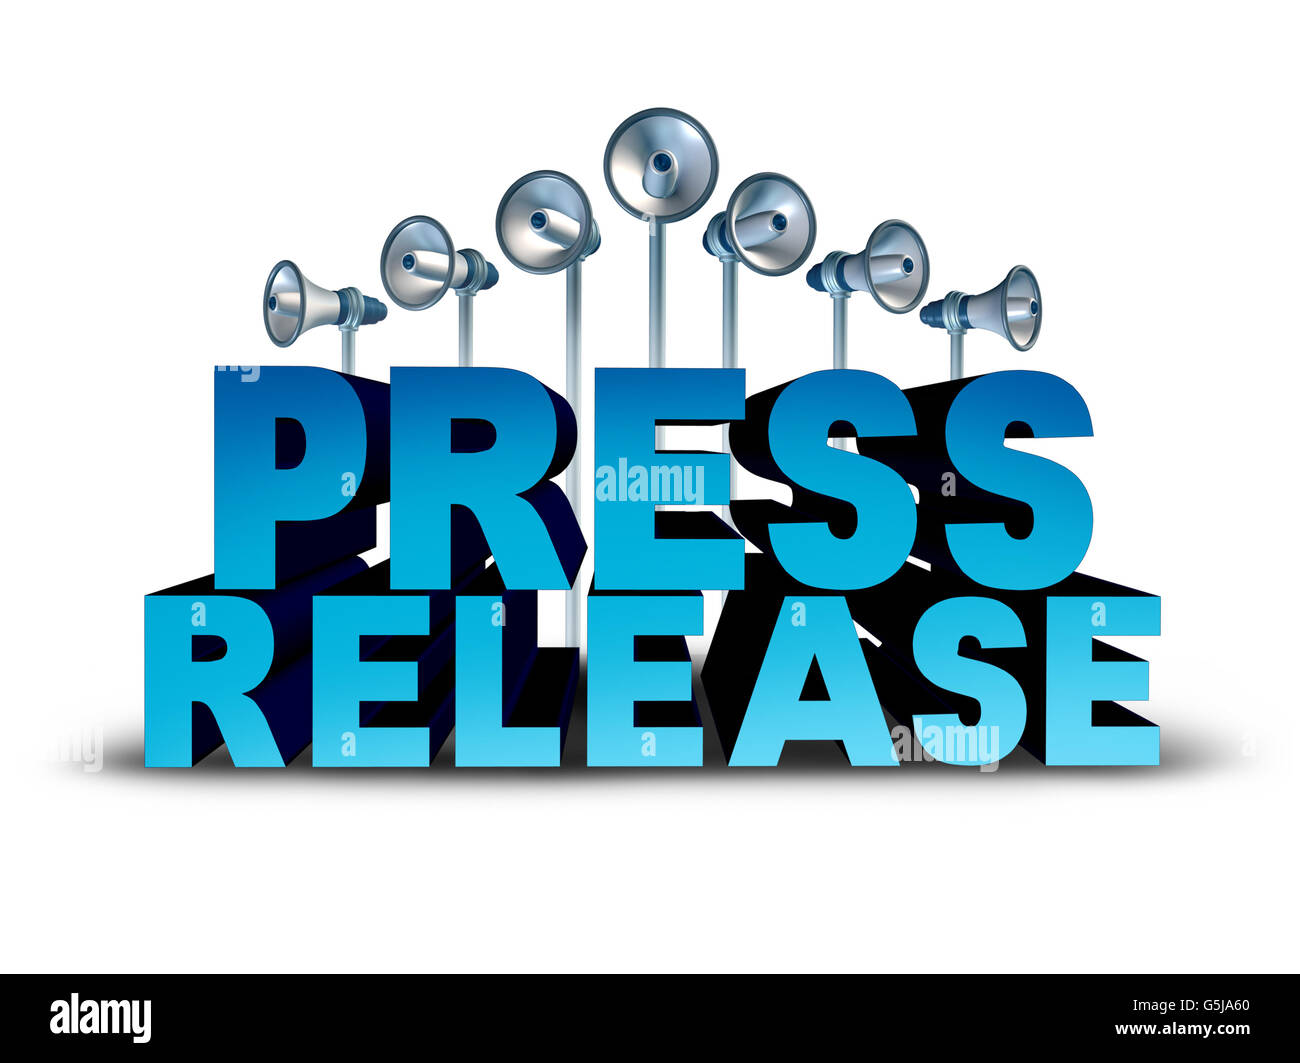 Press release news reporting and public relation communication concept as 3D illustration text with bullhorn or megaphone objects broadcasting an important message or media announcement sound bite. Stock Photo